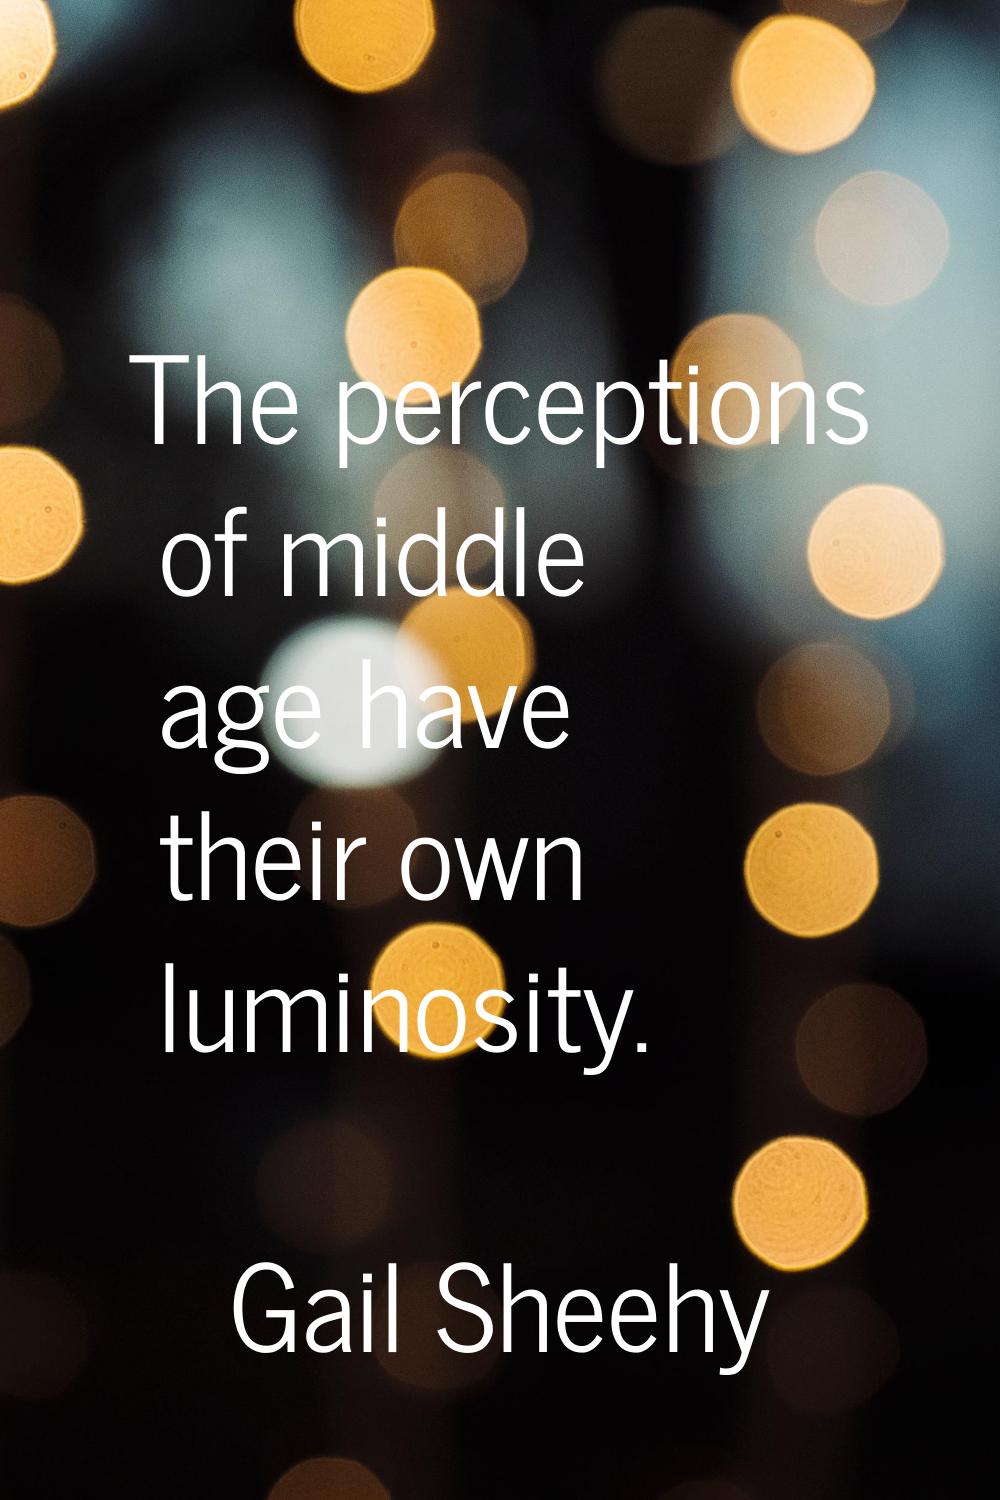 The perceptions of middle age have their own luminosity.